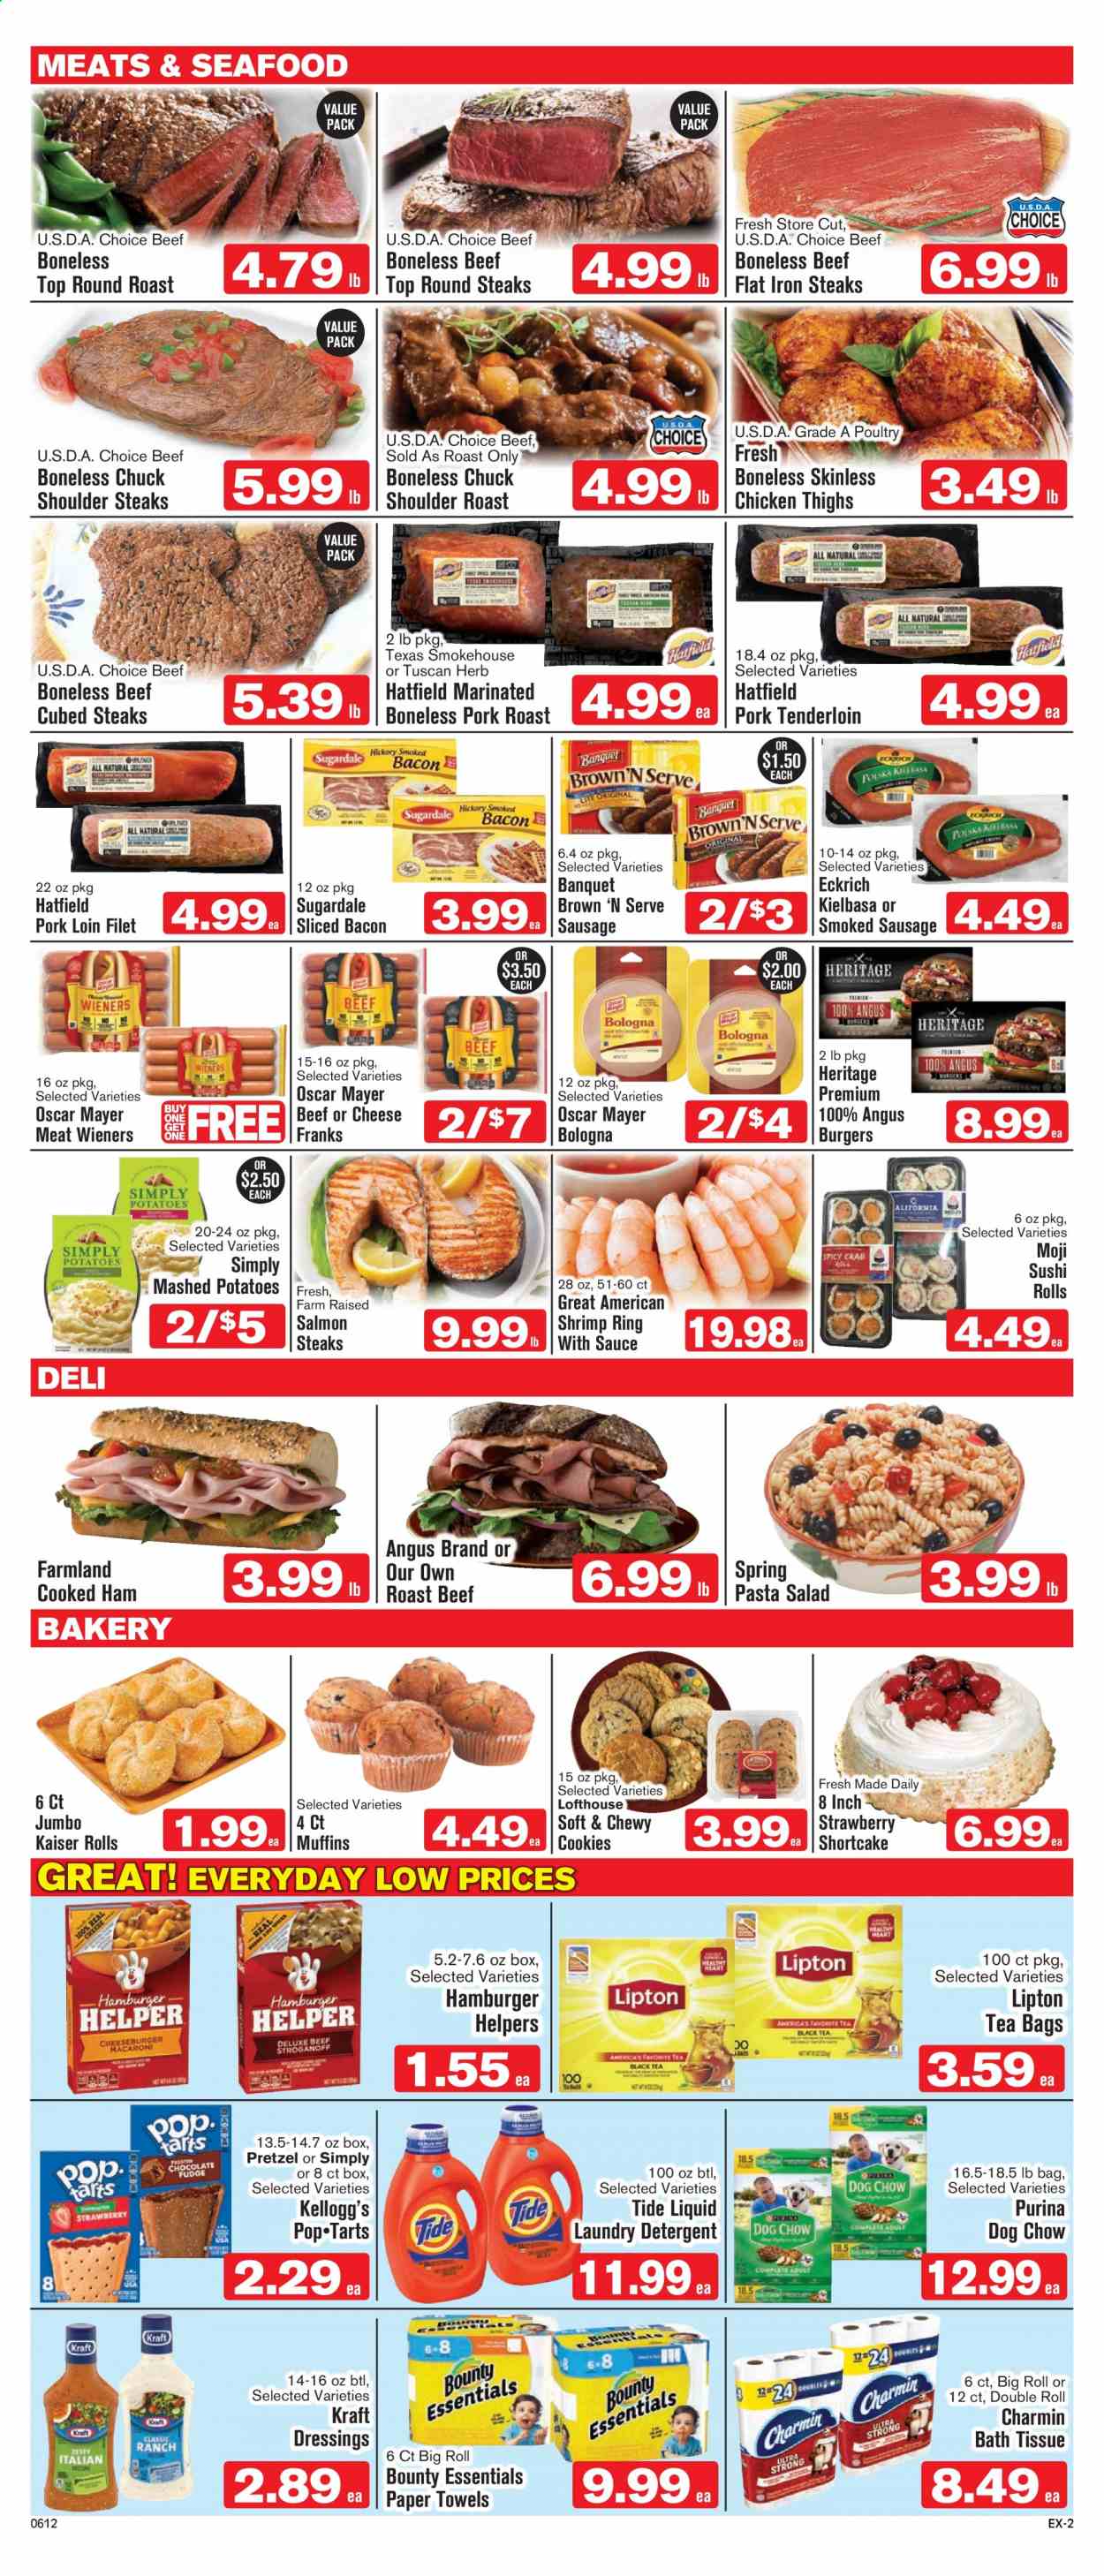 thumbnail - Shop ‘n Save Express Flyer - 06/12/2021 - 06/18/2021 - Sales products - pretzels, muffin, chicken thighs, beef meat, steak, round roast, roast beef, hamburger, pork loin, pork meat, pork roast, pork tenderloin, salmon, seafood, shrimps, mashed potatoes, pasta, Kraft®, Sugardale, bacon, cooked ham, ham, Oscar Mayer, sausage, smoked sausage, Brown 'N Serve, kielbasa, pasta salad, cookies, Bounty, Kellogg's, herbs, Lipton, tea bags, bath tissue, kitchen towels, paper towels, Charmin, detergent, Tide, laundry detergent, Dog Chow, Purina. Page 2.